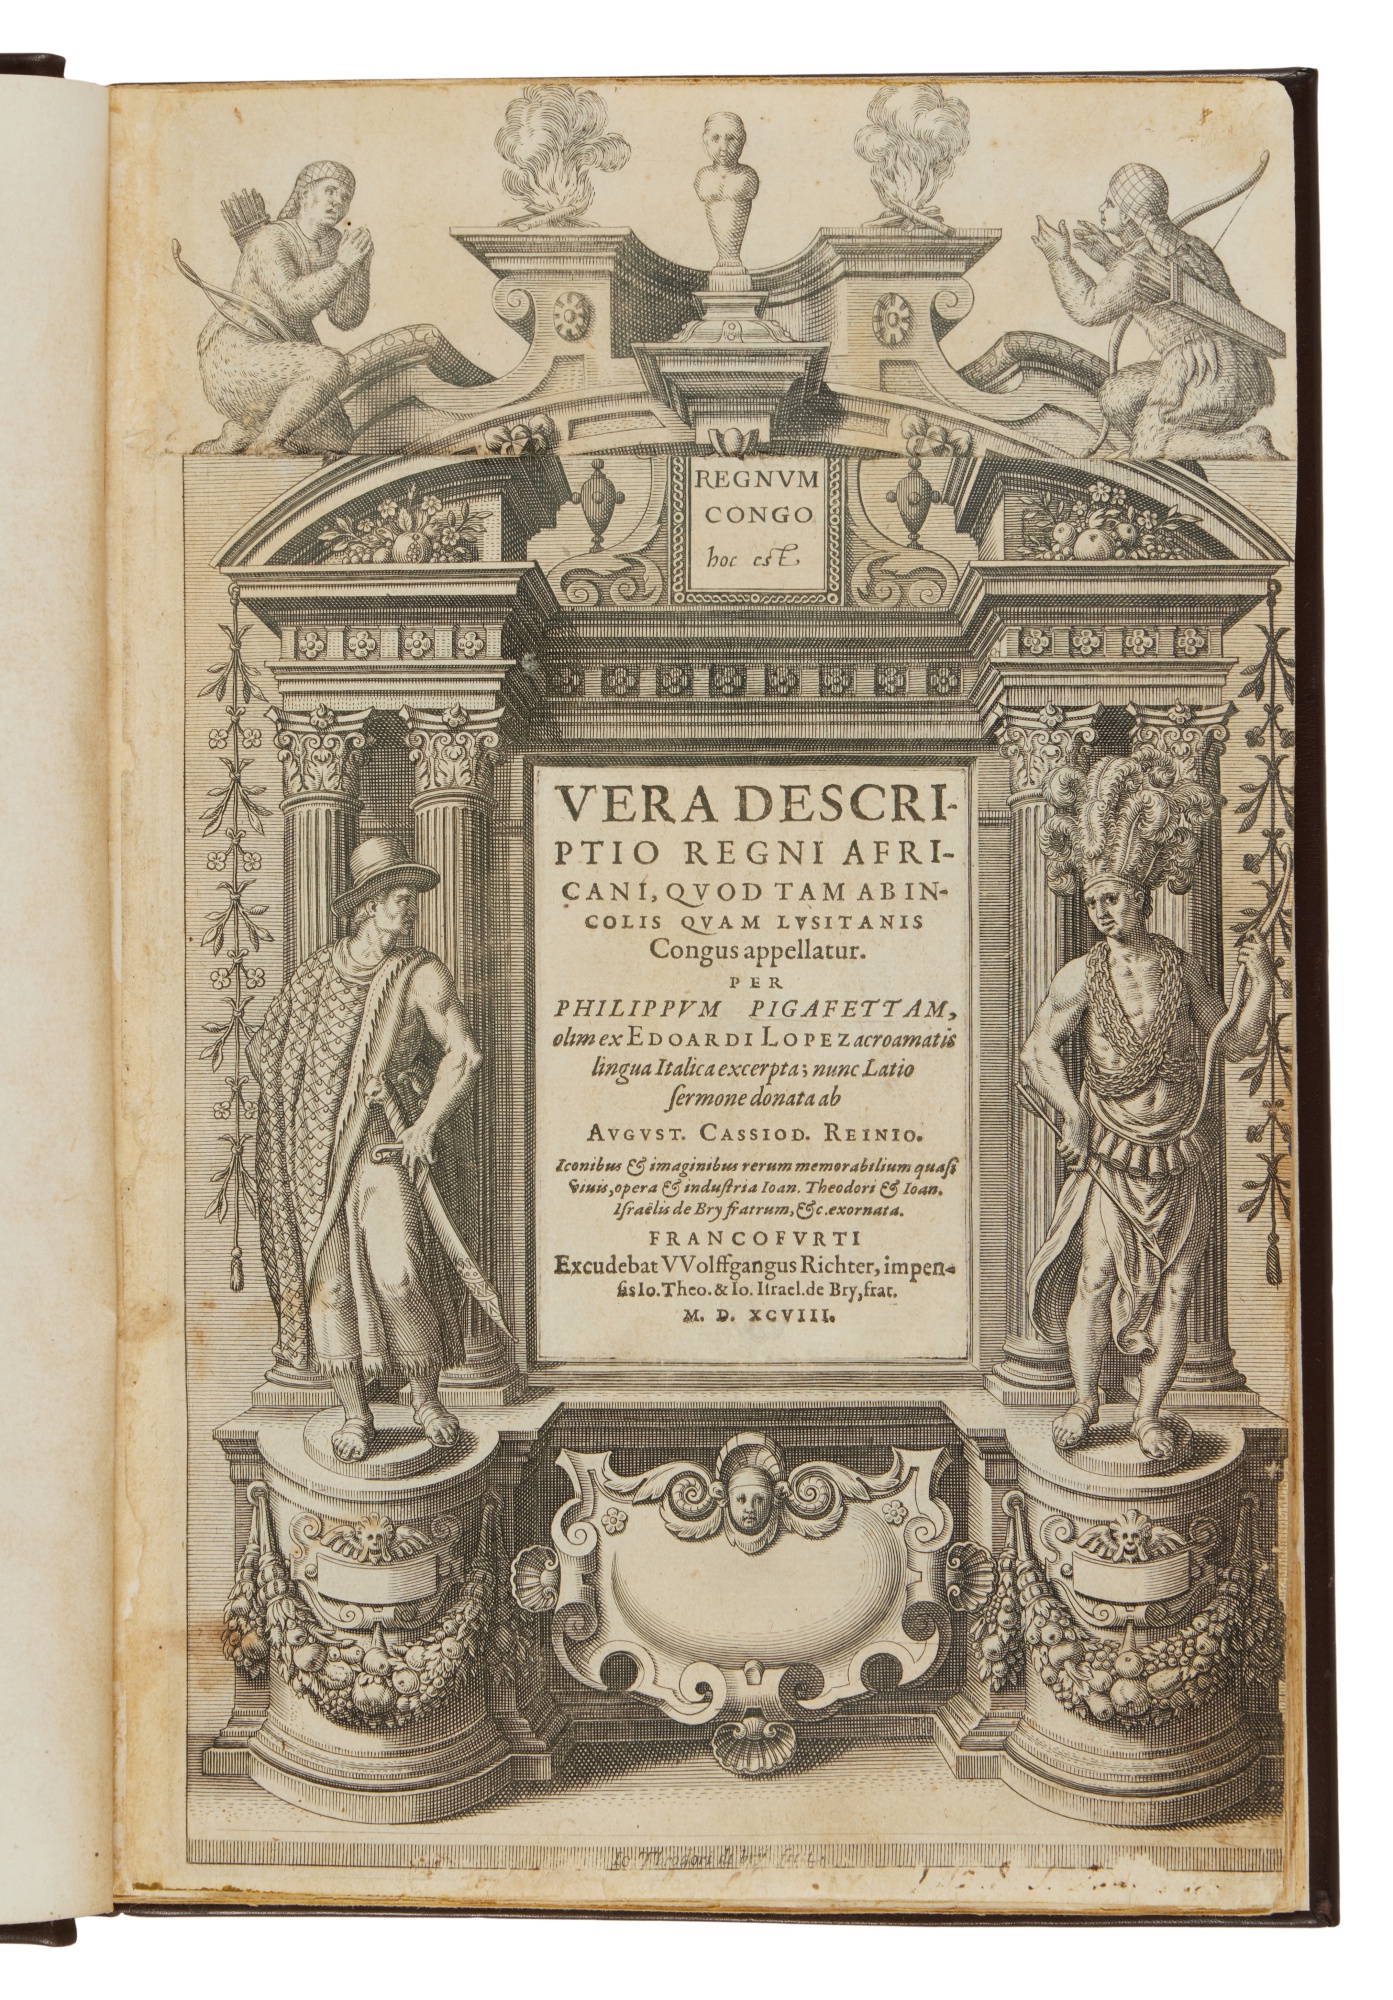 Bry, Theodor de | The most famed of all the collections of voyages - Image 14 of 16